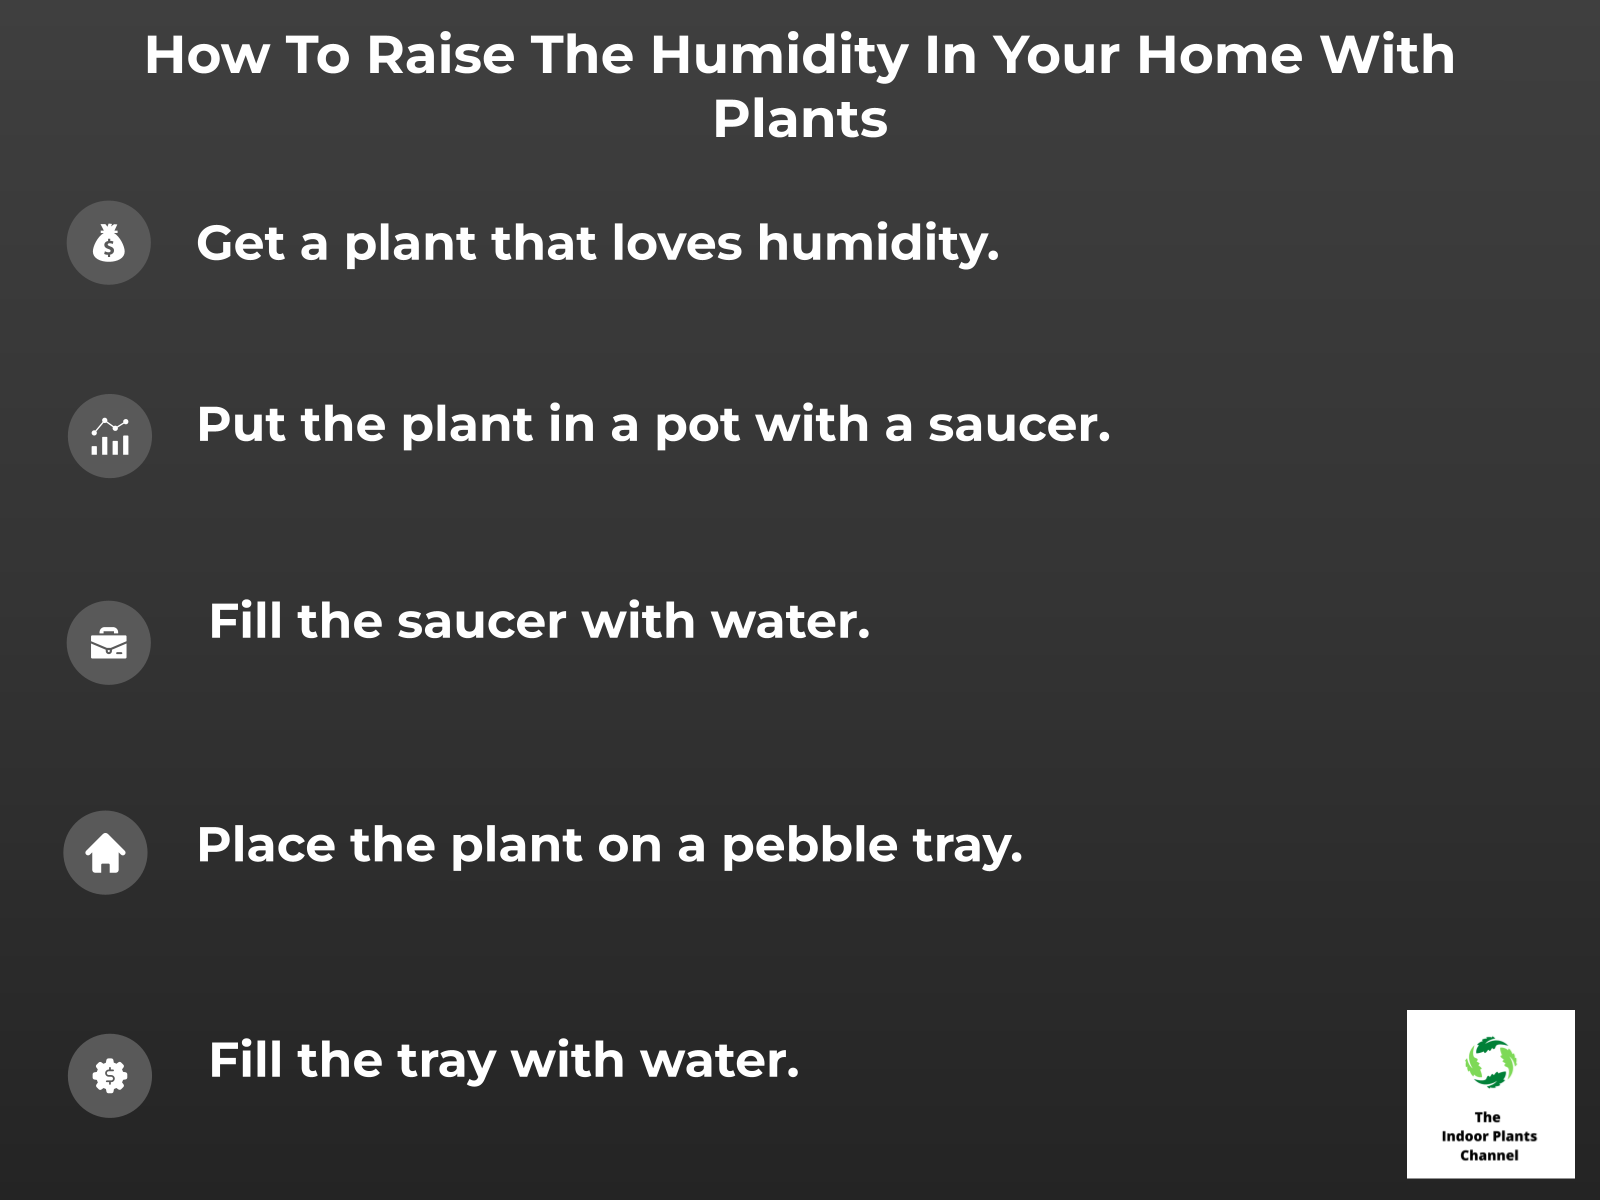 INFOGRAPHIC: How to Raise the Humidity in Your Home with Plants